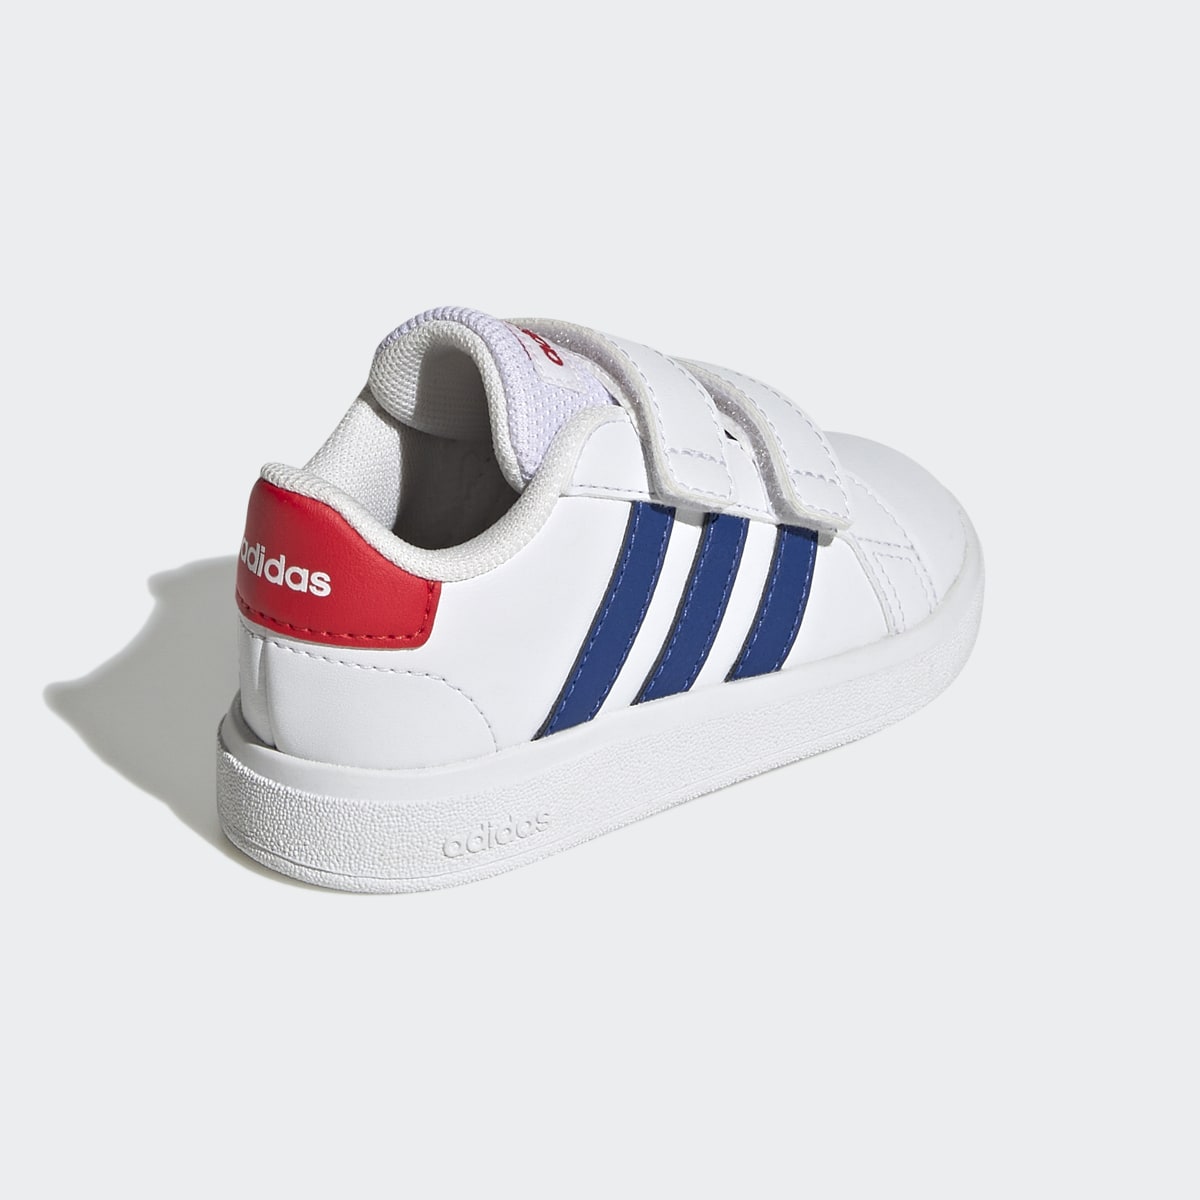 Adidas Grand Court Lifestyle Hook and Loop Shoes. 6